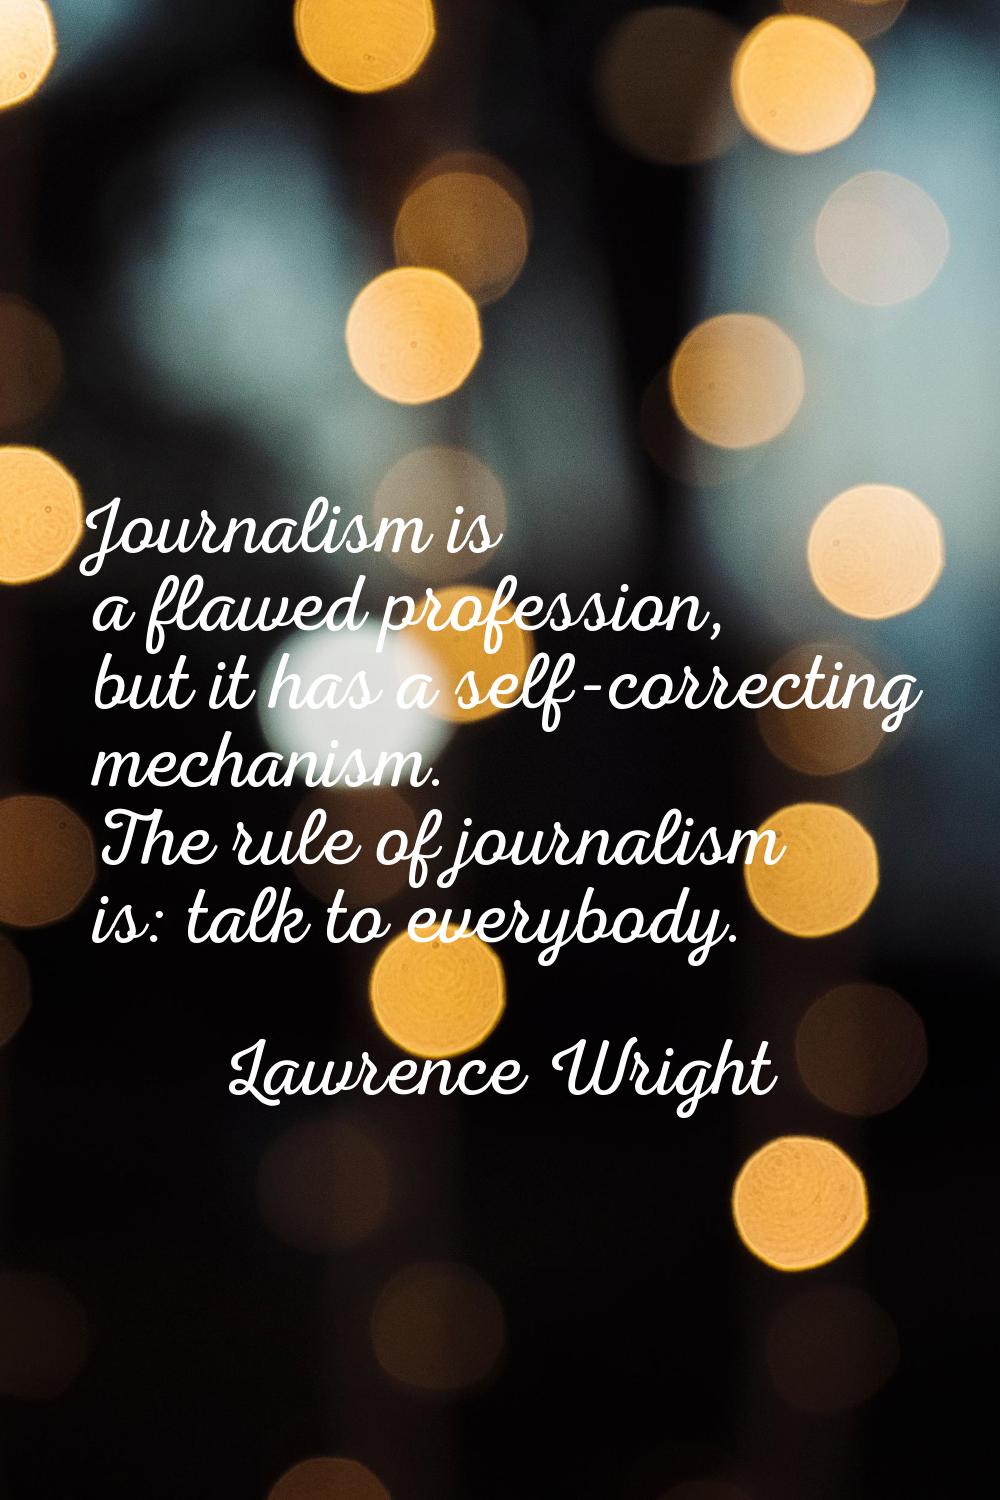 Journalism is a flawed profession, but it has a self-correcting mechanism. The rule of journalism i